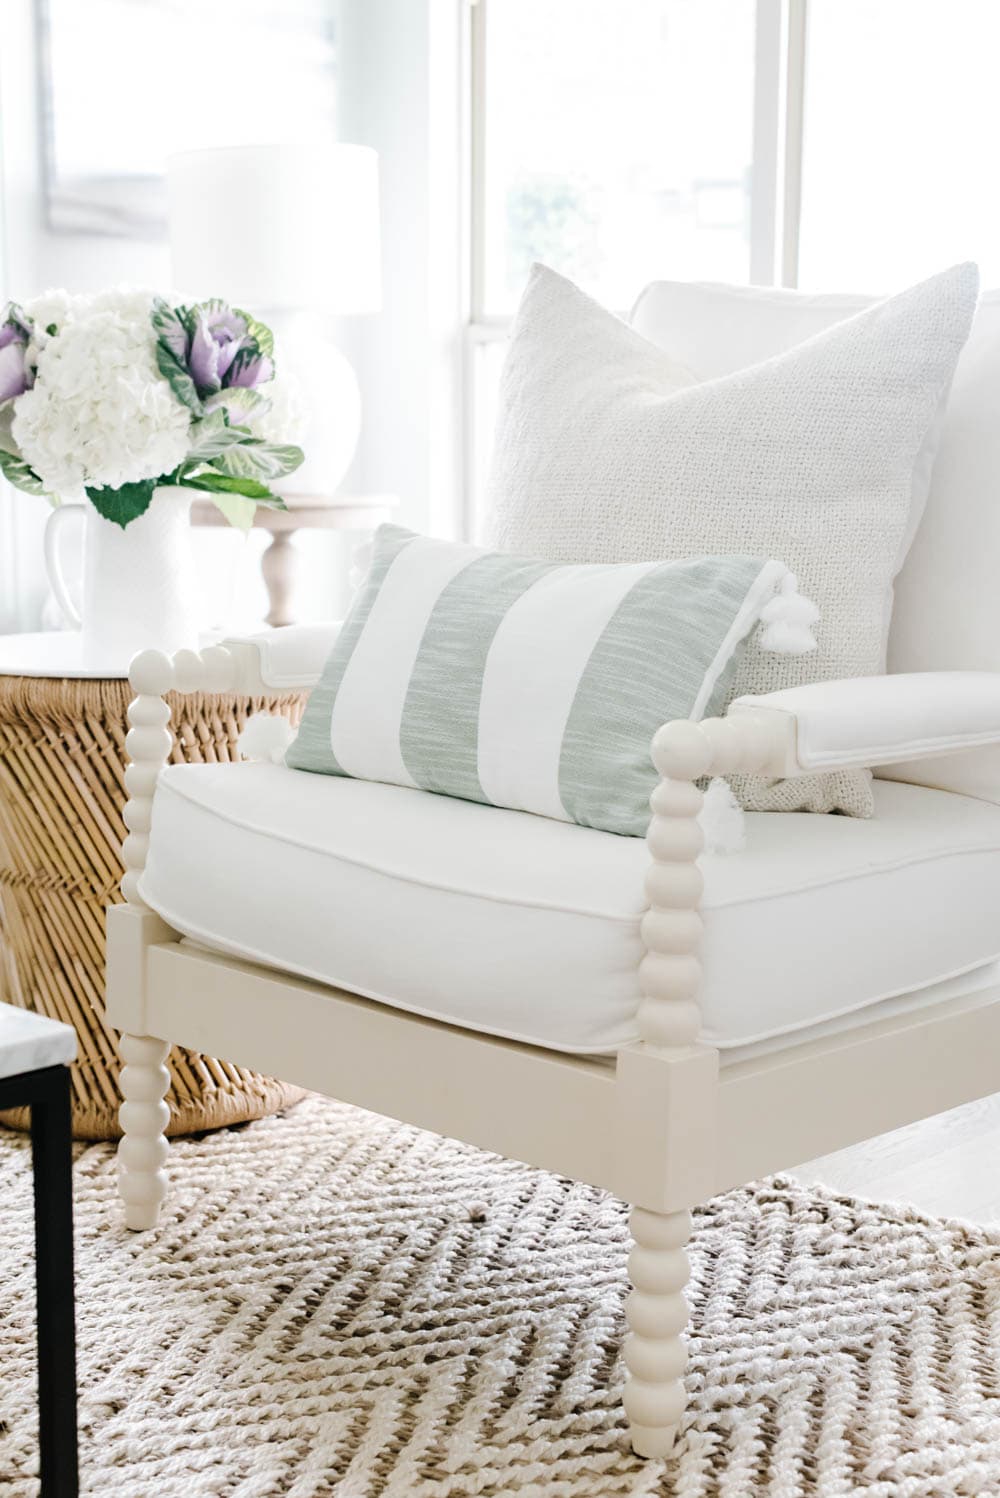 Tips to get a fresh curated look for summer effortlessly. #ABlissfulNest #summerhomedecor #summerstyle